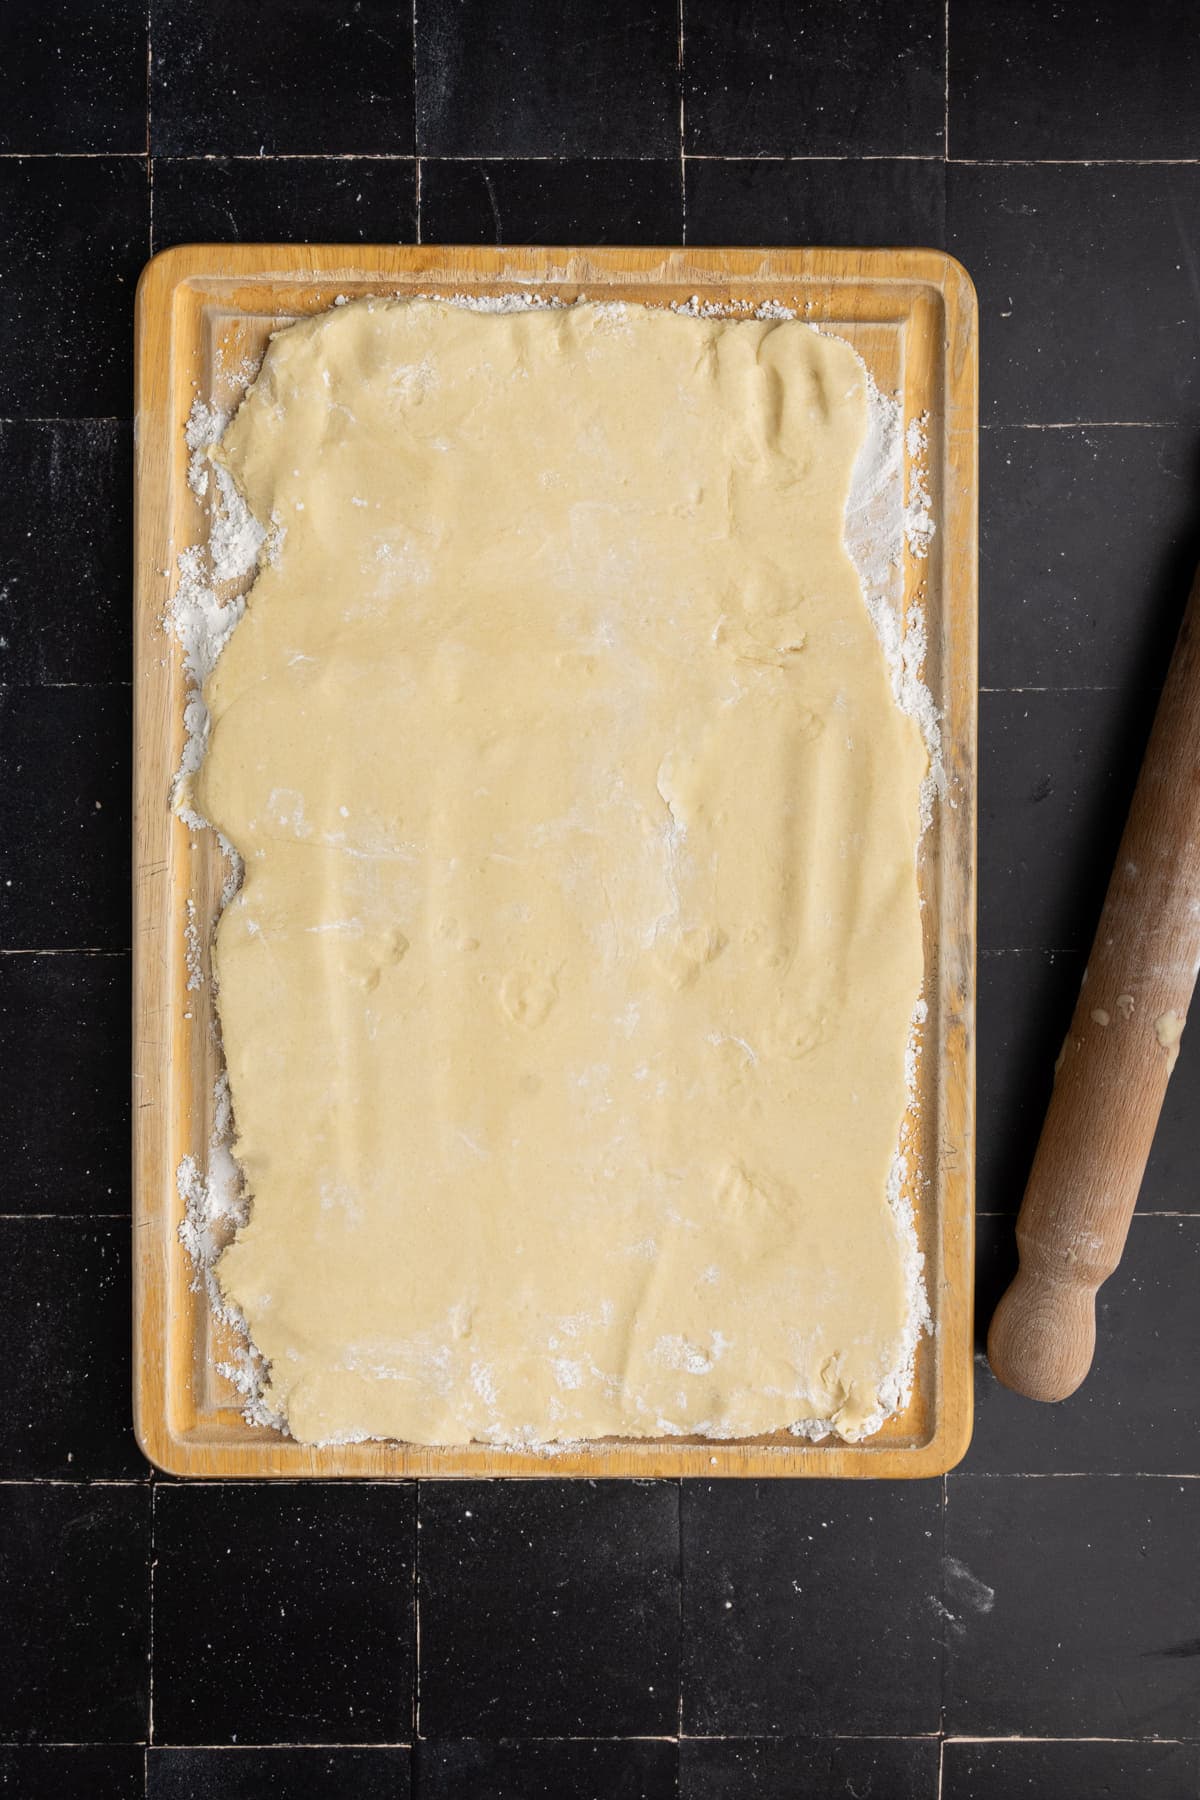 Rolling sugar cookie dough out on a floured surface to use cookie cutters.